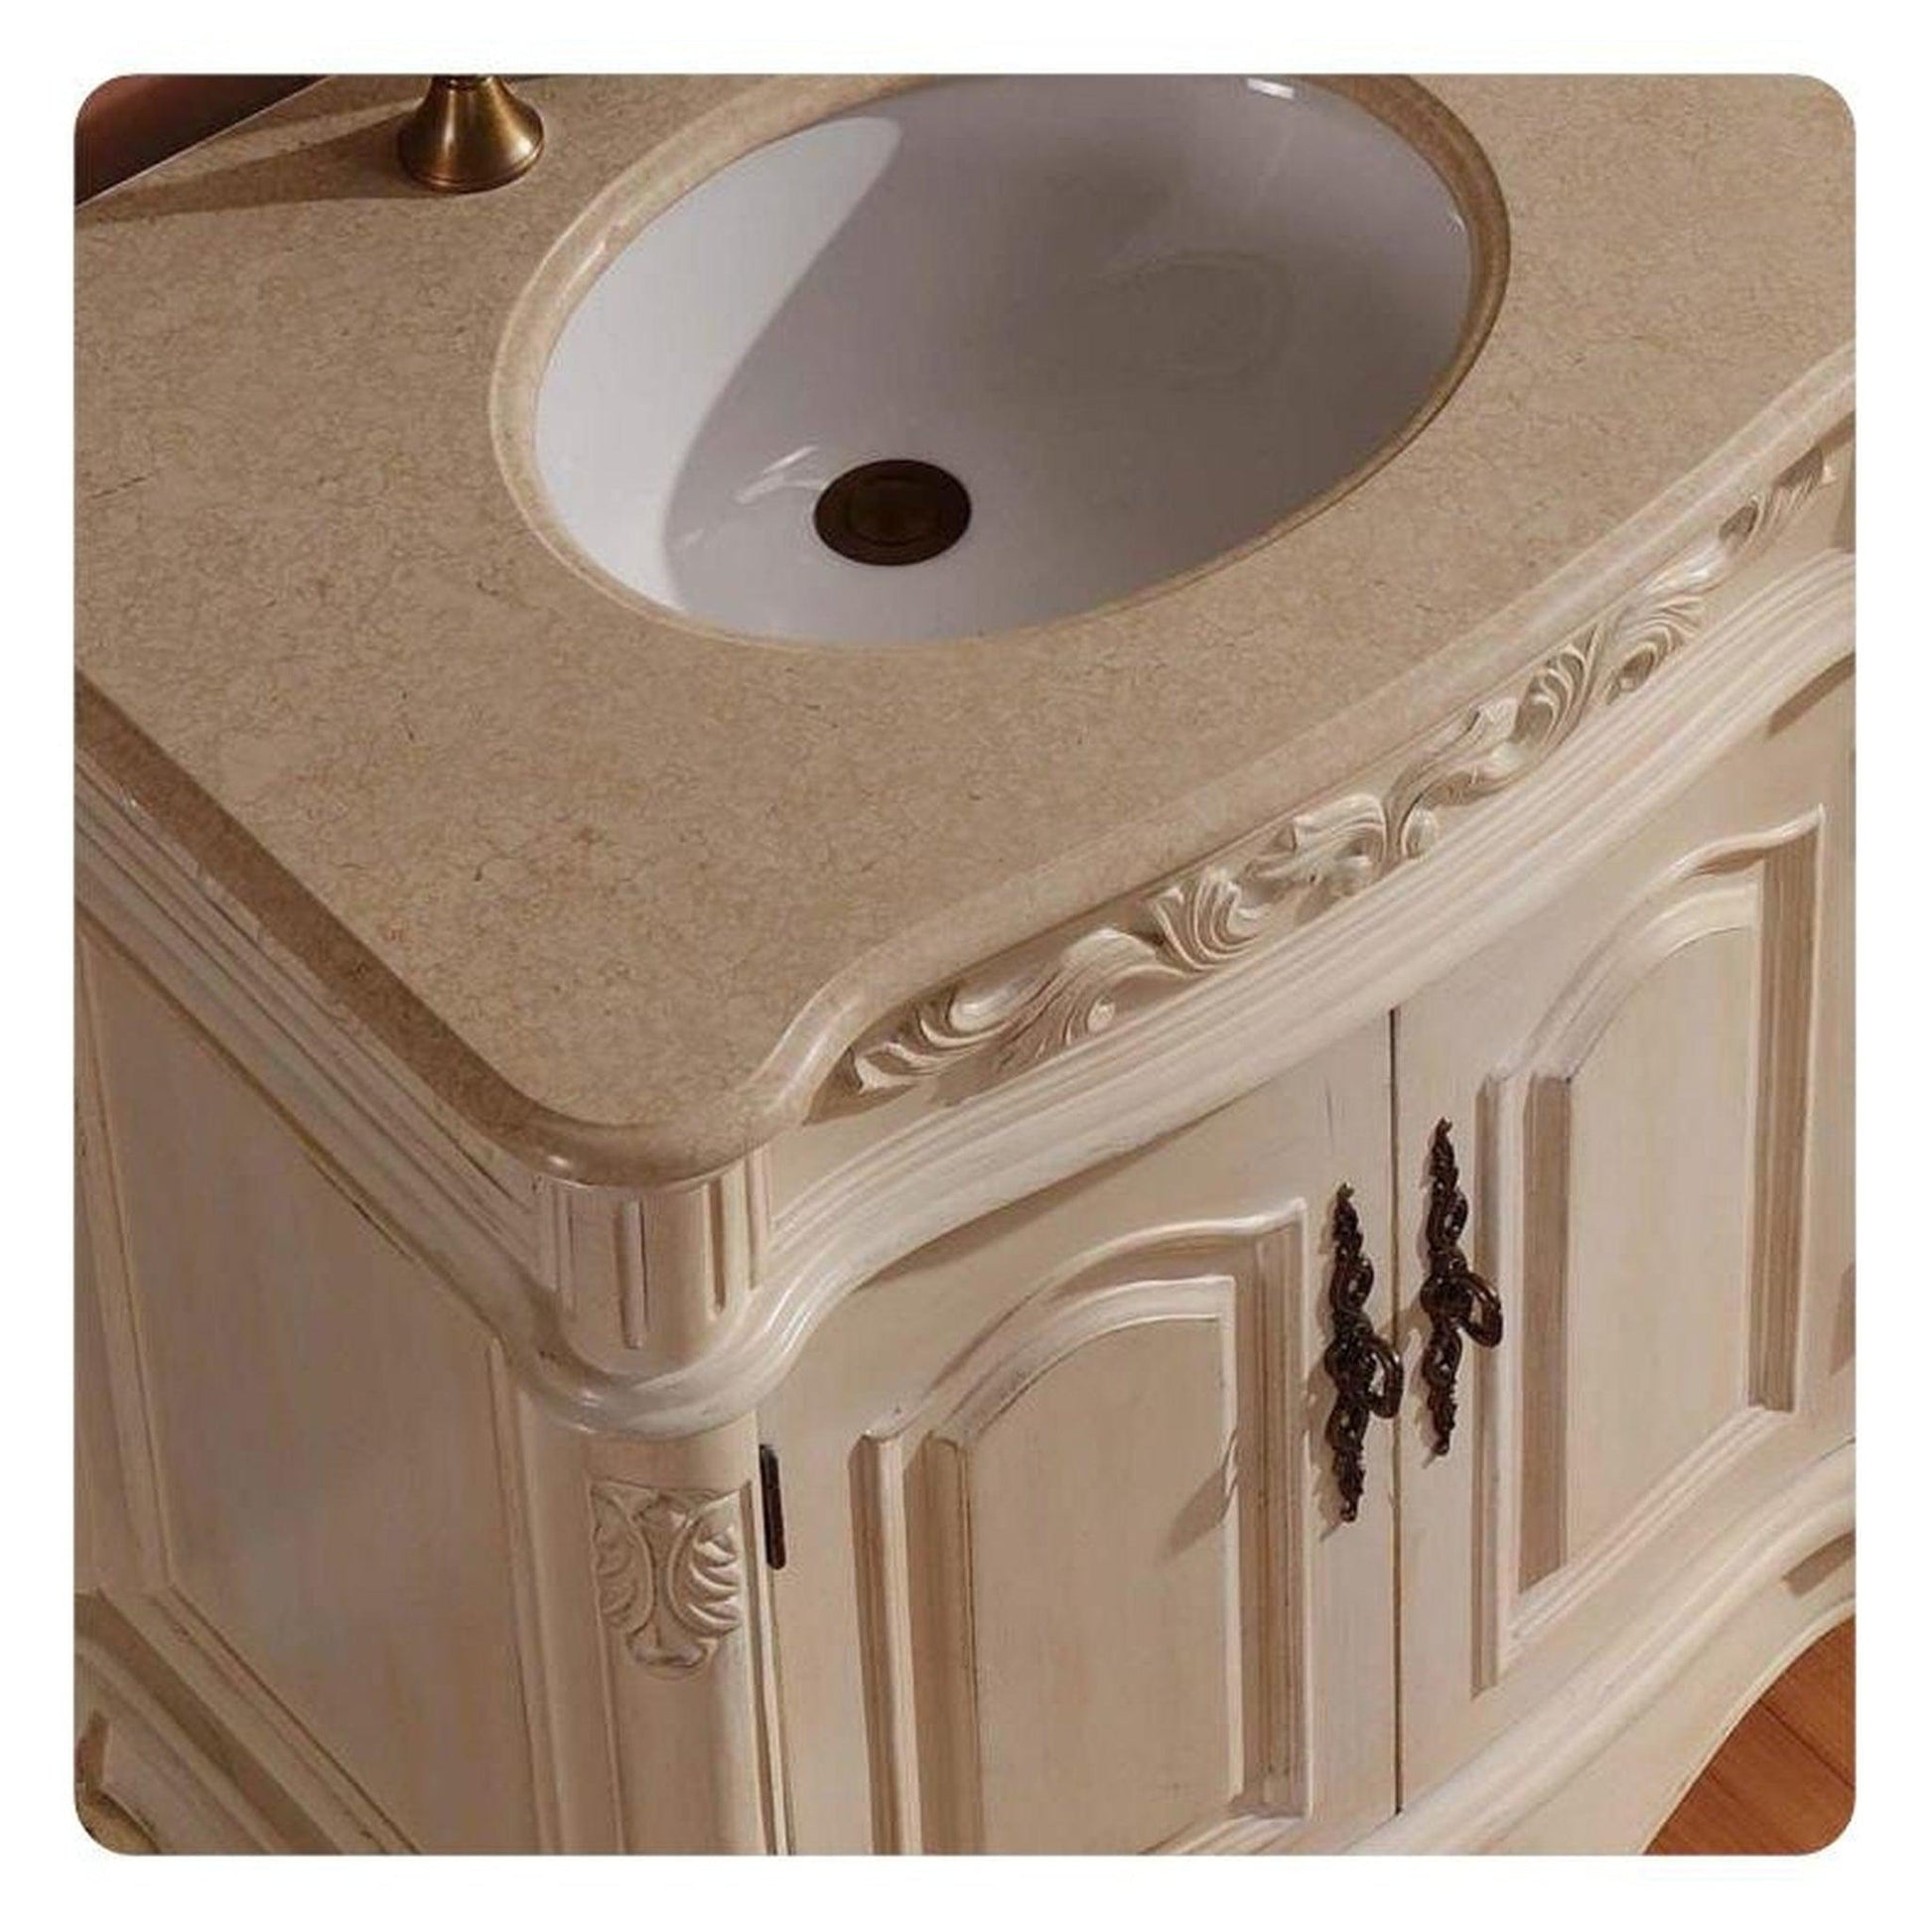 Silkroad Exclusive 72" Double Sink Antique White Bathroom Vanity With Crema Marfil Marble Countertop and White Ceramic Undermount Sink